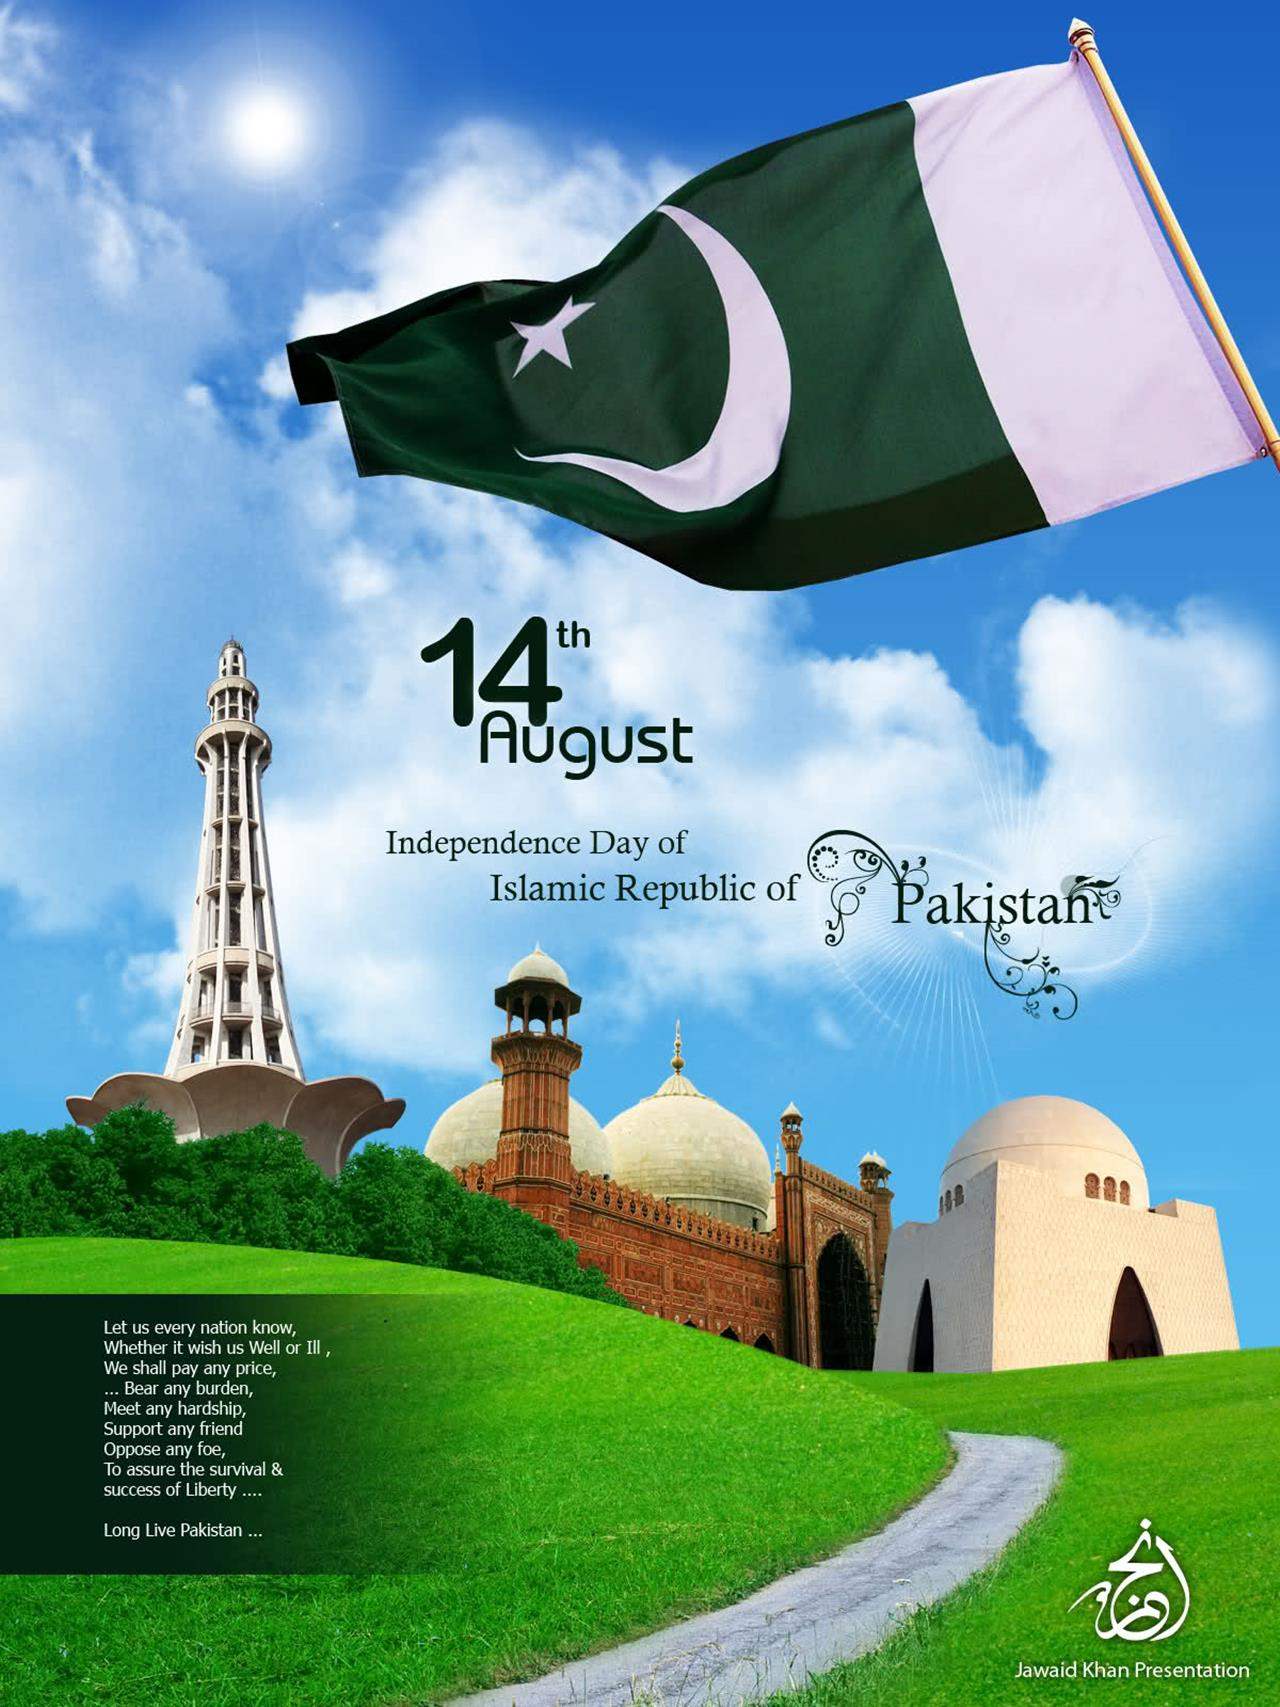 Free Download Pakistan Independence Day 2015 Wallpapers 2015 39 